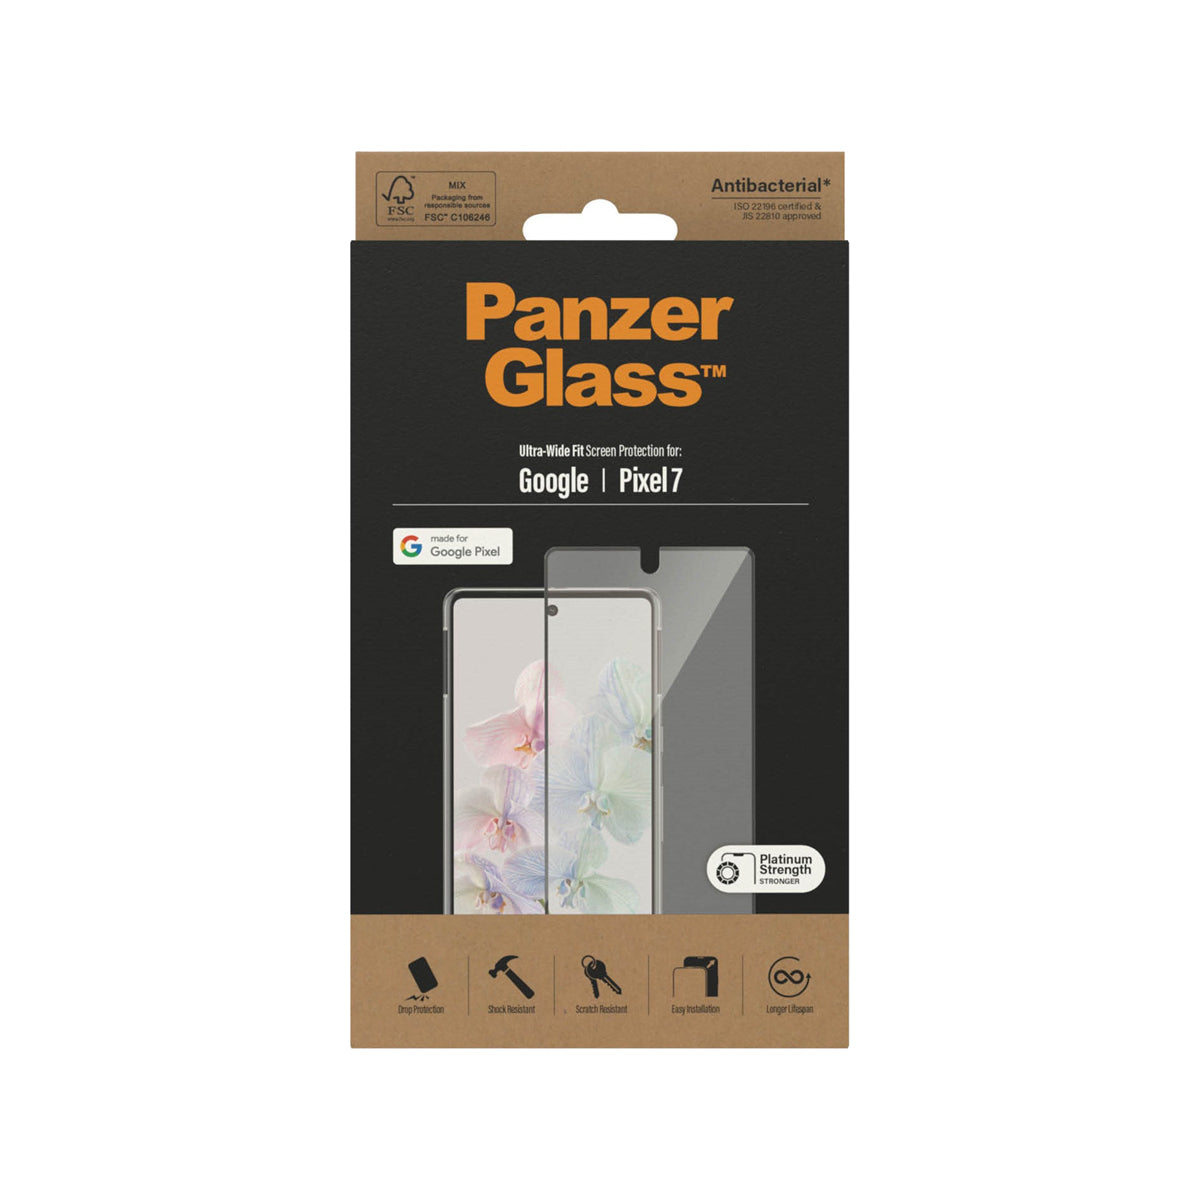 PanzerGlass Ultra-Wide Fit Antibacterial Screen Protector for Google Pixel 7 - Clear.